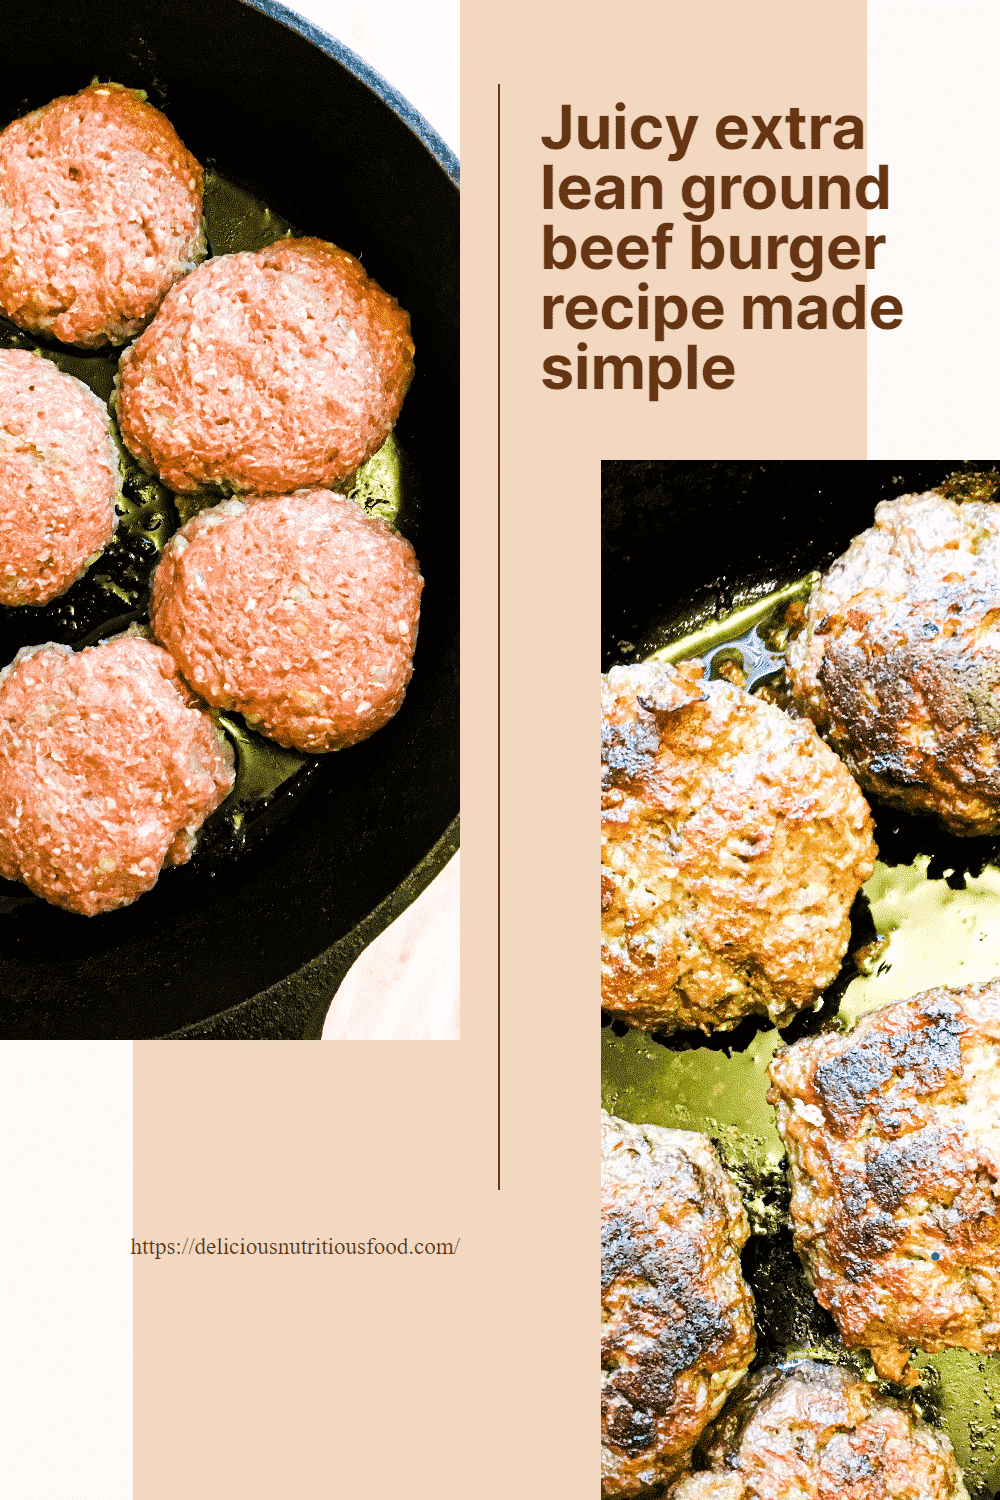 Delicious nutritious food, Juicy extra lean ground beef burger recipe made simple, #recipe #groundbeefrecipe #burger #burger patties #groundbeefpatties #simple #food #foodie #sandwich #healthy #juicy #easy #delicious #nutritious #comfortmeal #deliciousnutritiousfood #extraleangroundbeefrecipe #homemade #luch #dinner #easymeal #fromscratch #30minutesmeal #deliciousnutritiousfoods #meatrecipes #groundedbeefrecipes #castironrecipes #castironskillet #5ingredientsrecipes #healthymaindish #simplehealthylunchrecipes #simplehealthydinnerrecipes #dinner #easylunchrecipe #recipesilove #yummyburgers #tortillasdinner #healthytortillas #tortillasrecipe #healthy #simple #fromscratch #delicious #nutritious
#recipewithleangroundbeef #sodaburger #tenderizinggroundbeefwothbakingsoda #lean
#howmakeleangroundbeefjuicy #simpleburger #groundburger #recipewithextraleangroundbeef #extraleangroundbeefprotein
#leangroundbeefburgerpatty #leanorextraleangroundbeefforburgers #leanbeef #bakingsodahamburgerpatties #leanburger #howmakejuicygroundbeef#whatisleangroundbeef #howmakegroundbeefjuicy  
#leanburgerpatties #leanbeefburgerpatties #leangroundbeefpatties#groundburger #extraburger #juicypatty #juicygroundbeef #juicyburger #groundbeeflean #leangroundbeef  
